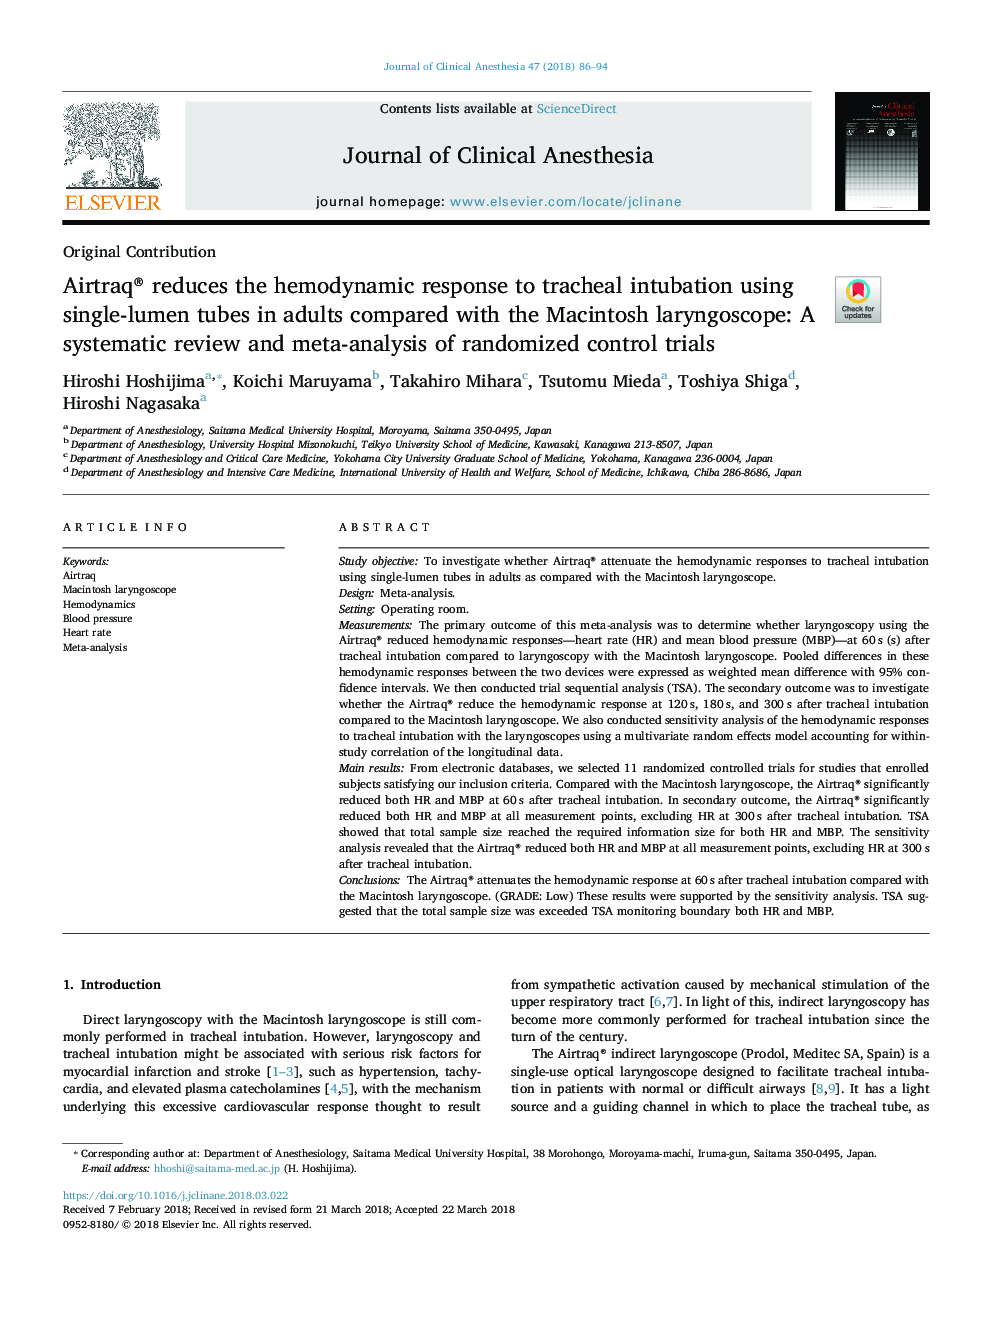 Airtraq® reduces the hemodynamic response to tracheal intubation using single-lumen tubes in adults compared with the Macintosh laryngoscope: A systematic review and meta-analysis of randomized control trials